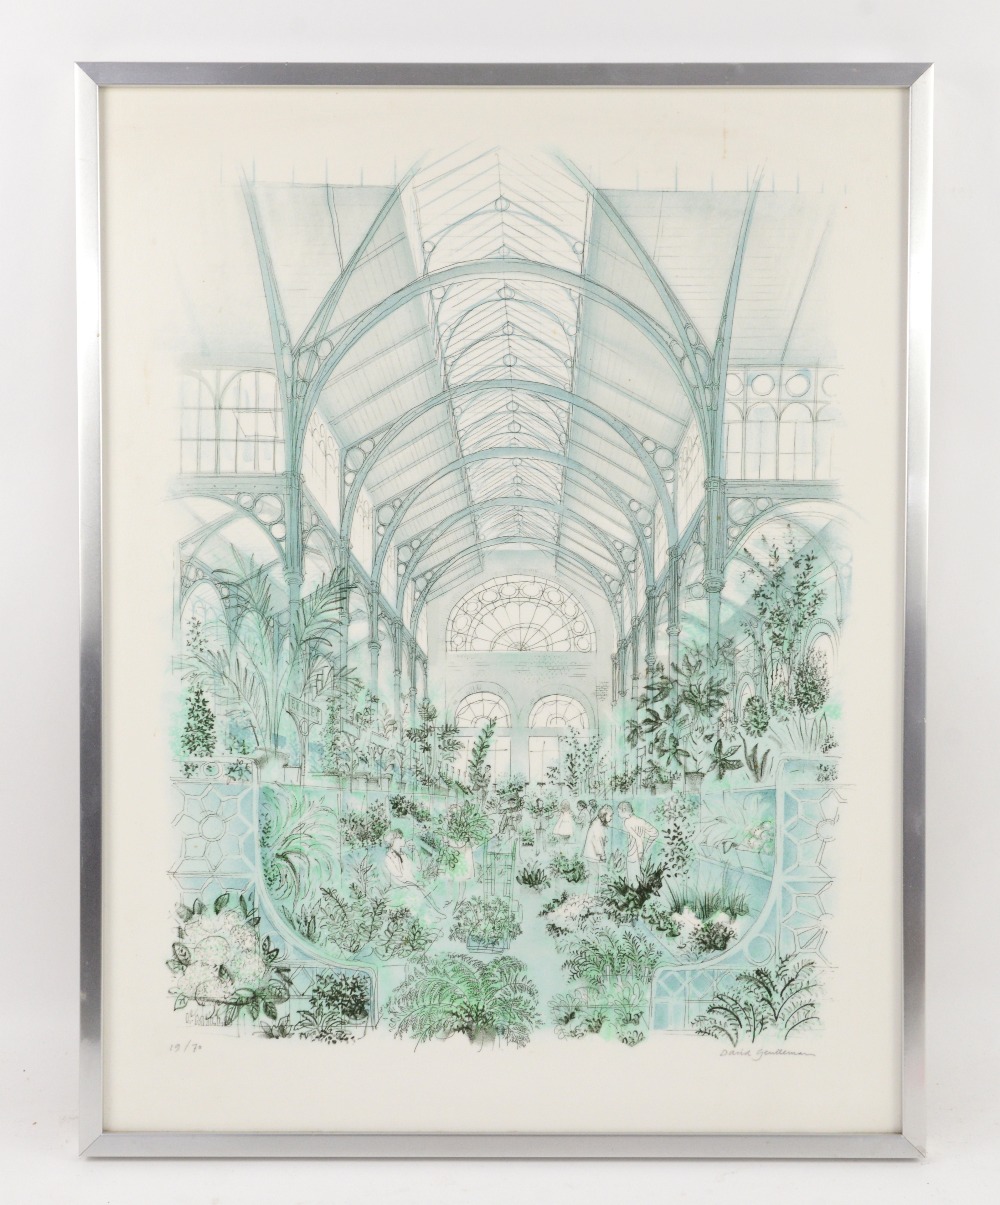 David Gentleman, Covent Garden Flower Market, print, limited edition no 19/70, in silver frame, 60 x - Image 4 of 7